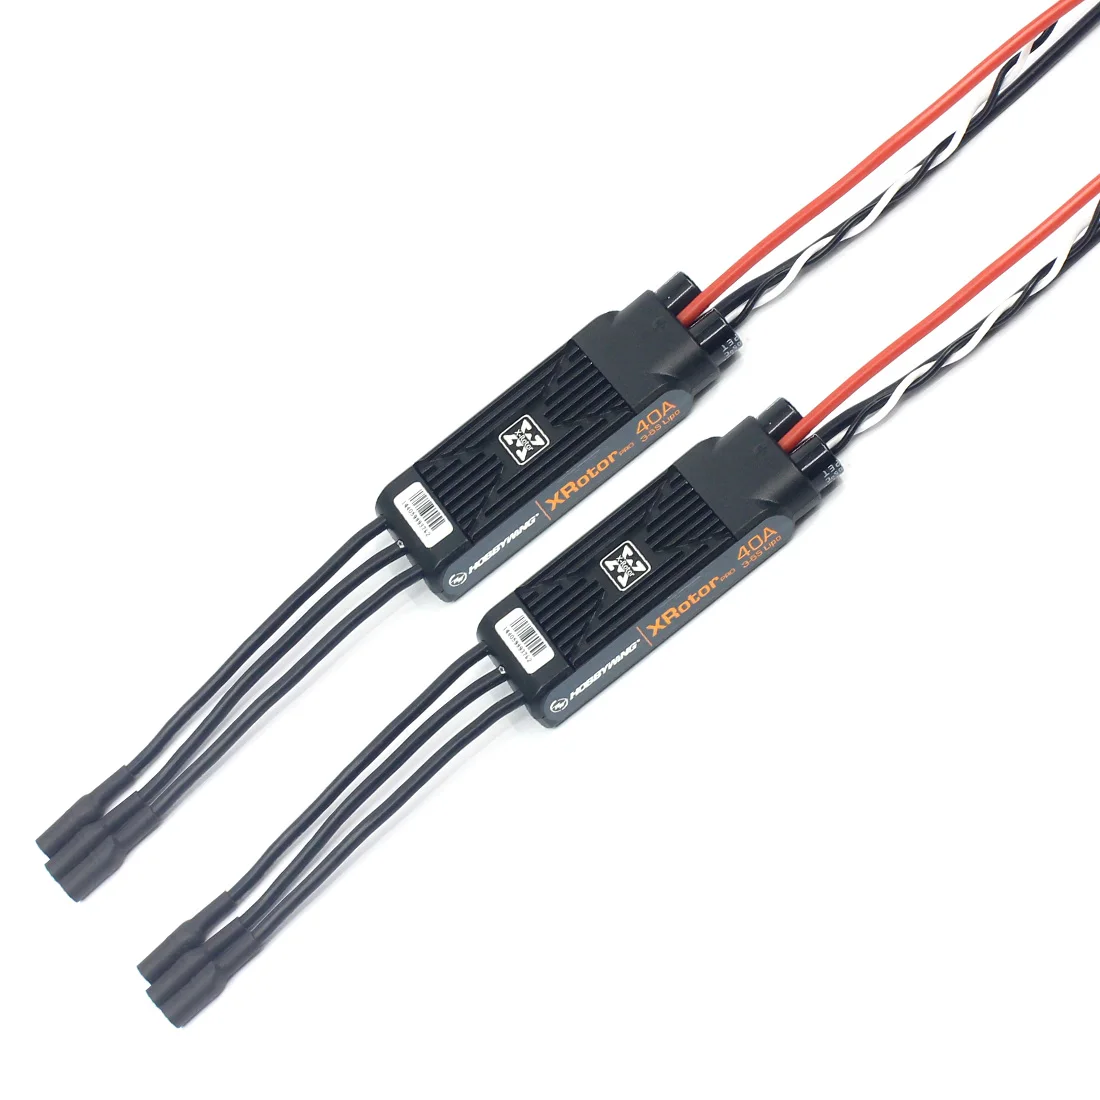 

New 2pcs Hobbywing XRotor Pro 40A ESC No BEC 3S-6S Lipo Brushless ESC DEO for RC Drone Multi-Axle Copter F19256/7